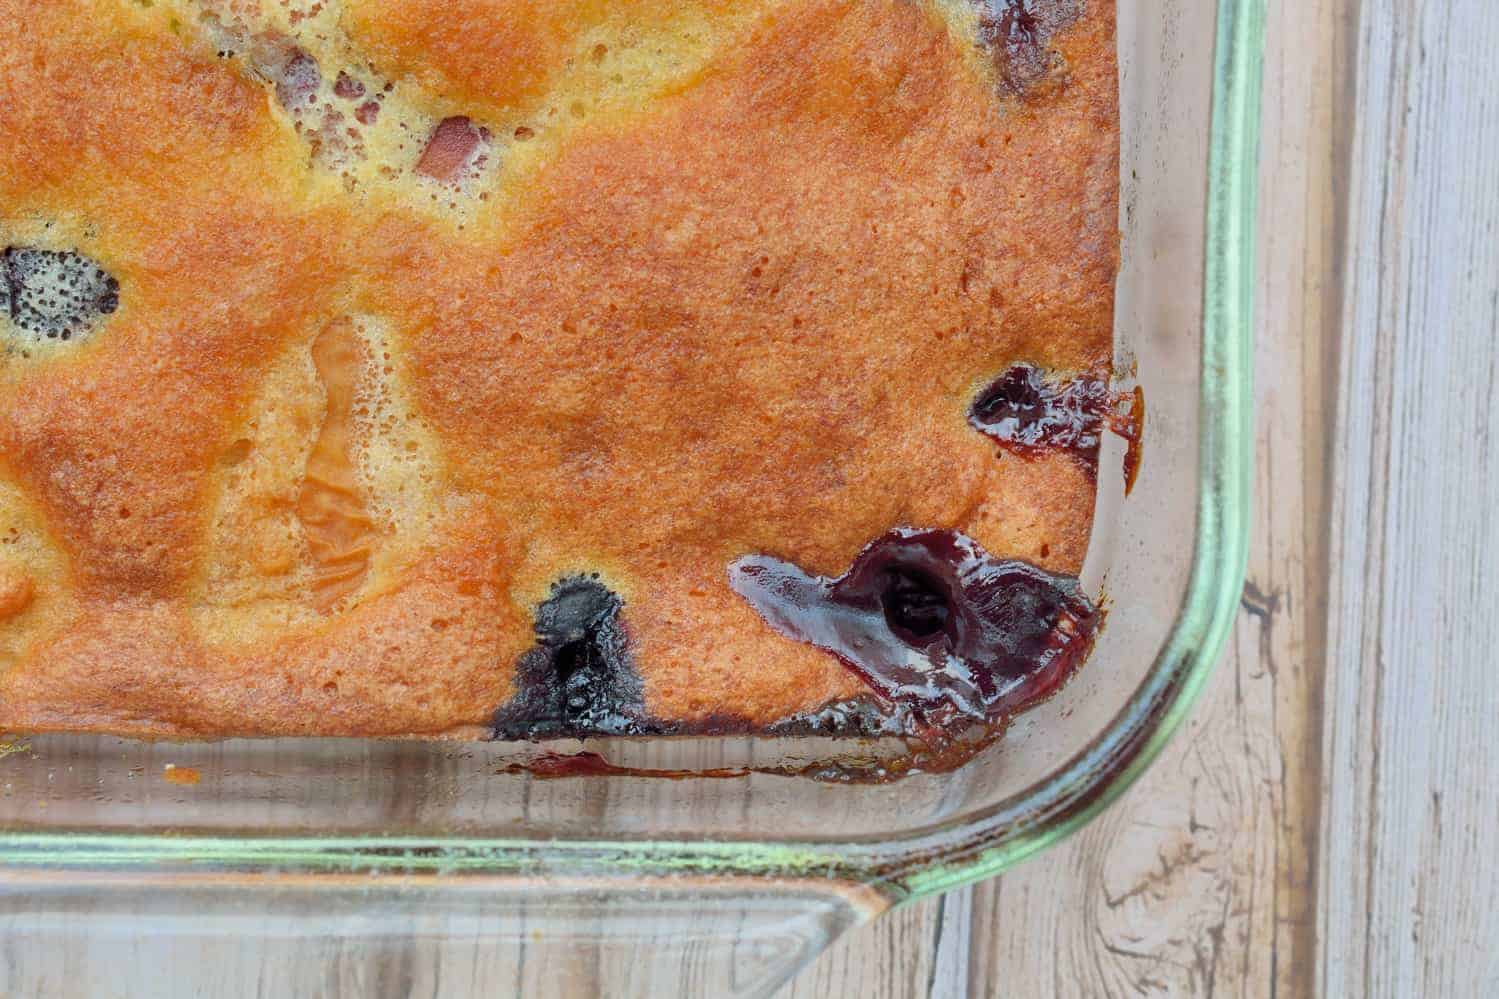 Peach and Cherry Cobbler Recipe is an essential summer dessert packed with fresh peaches and cherries and an almond breading. www.savoryexperiments.com